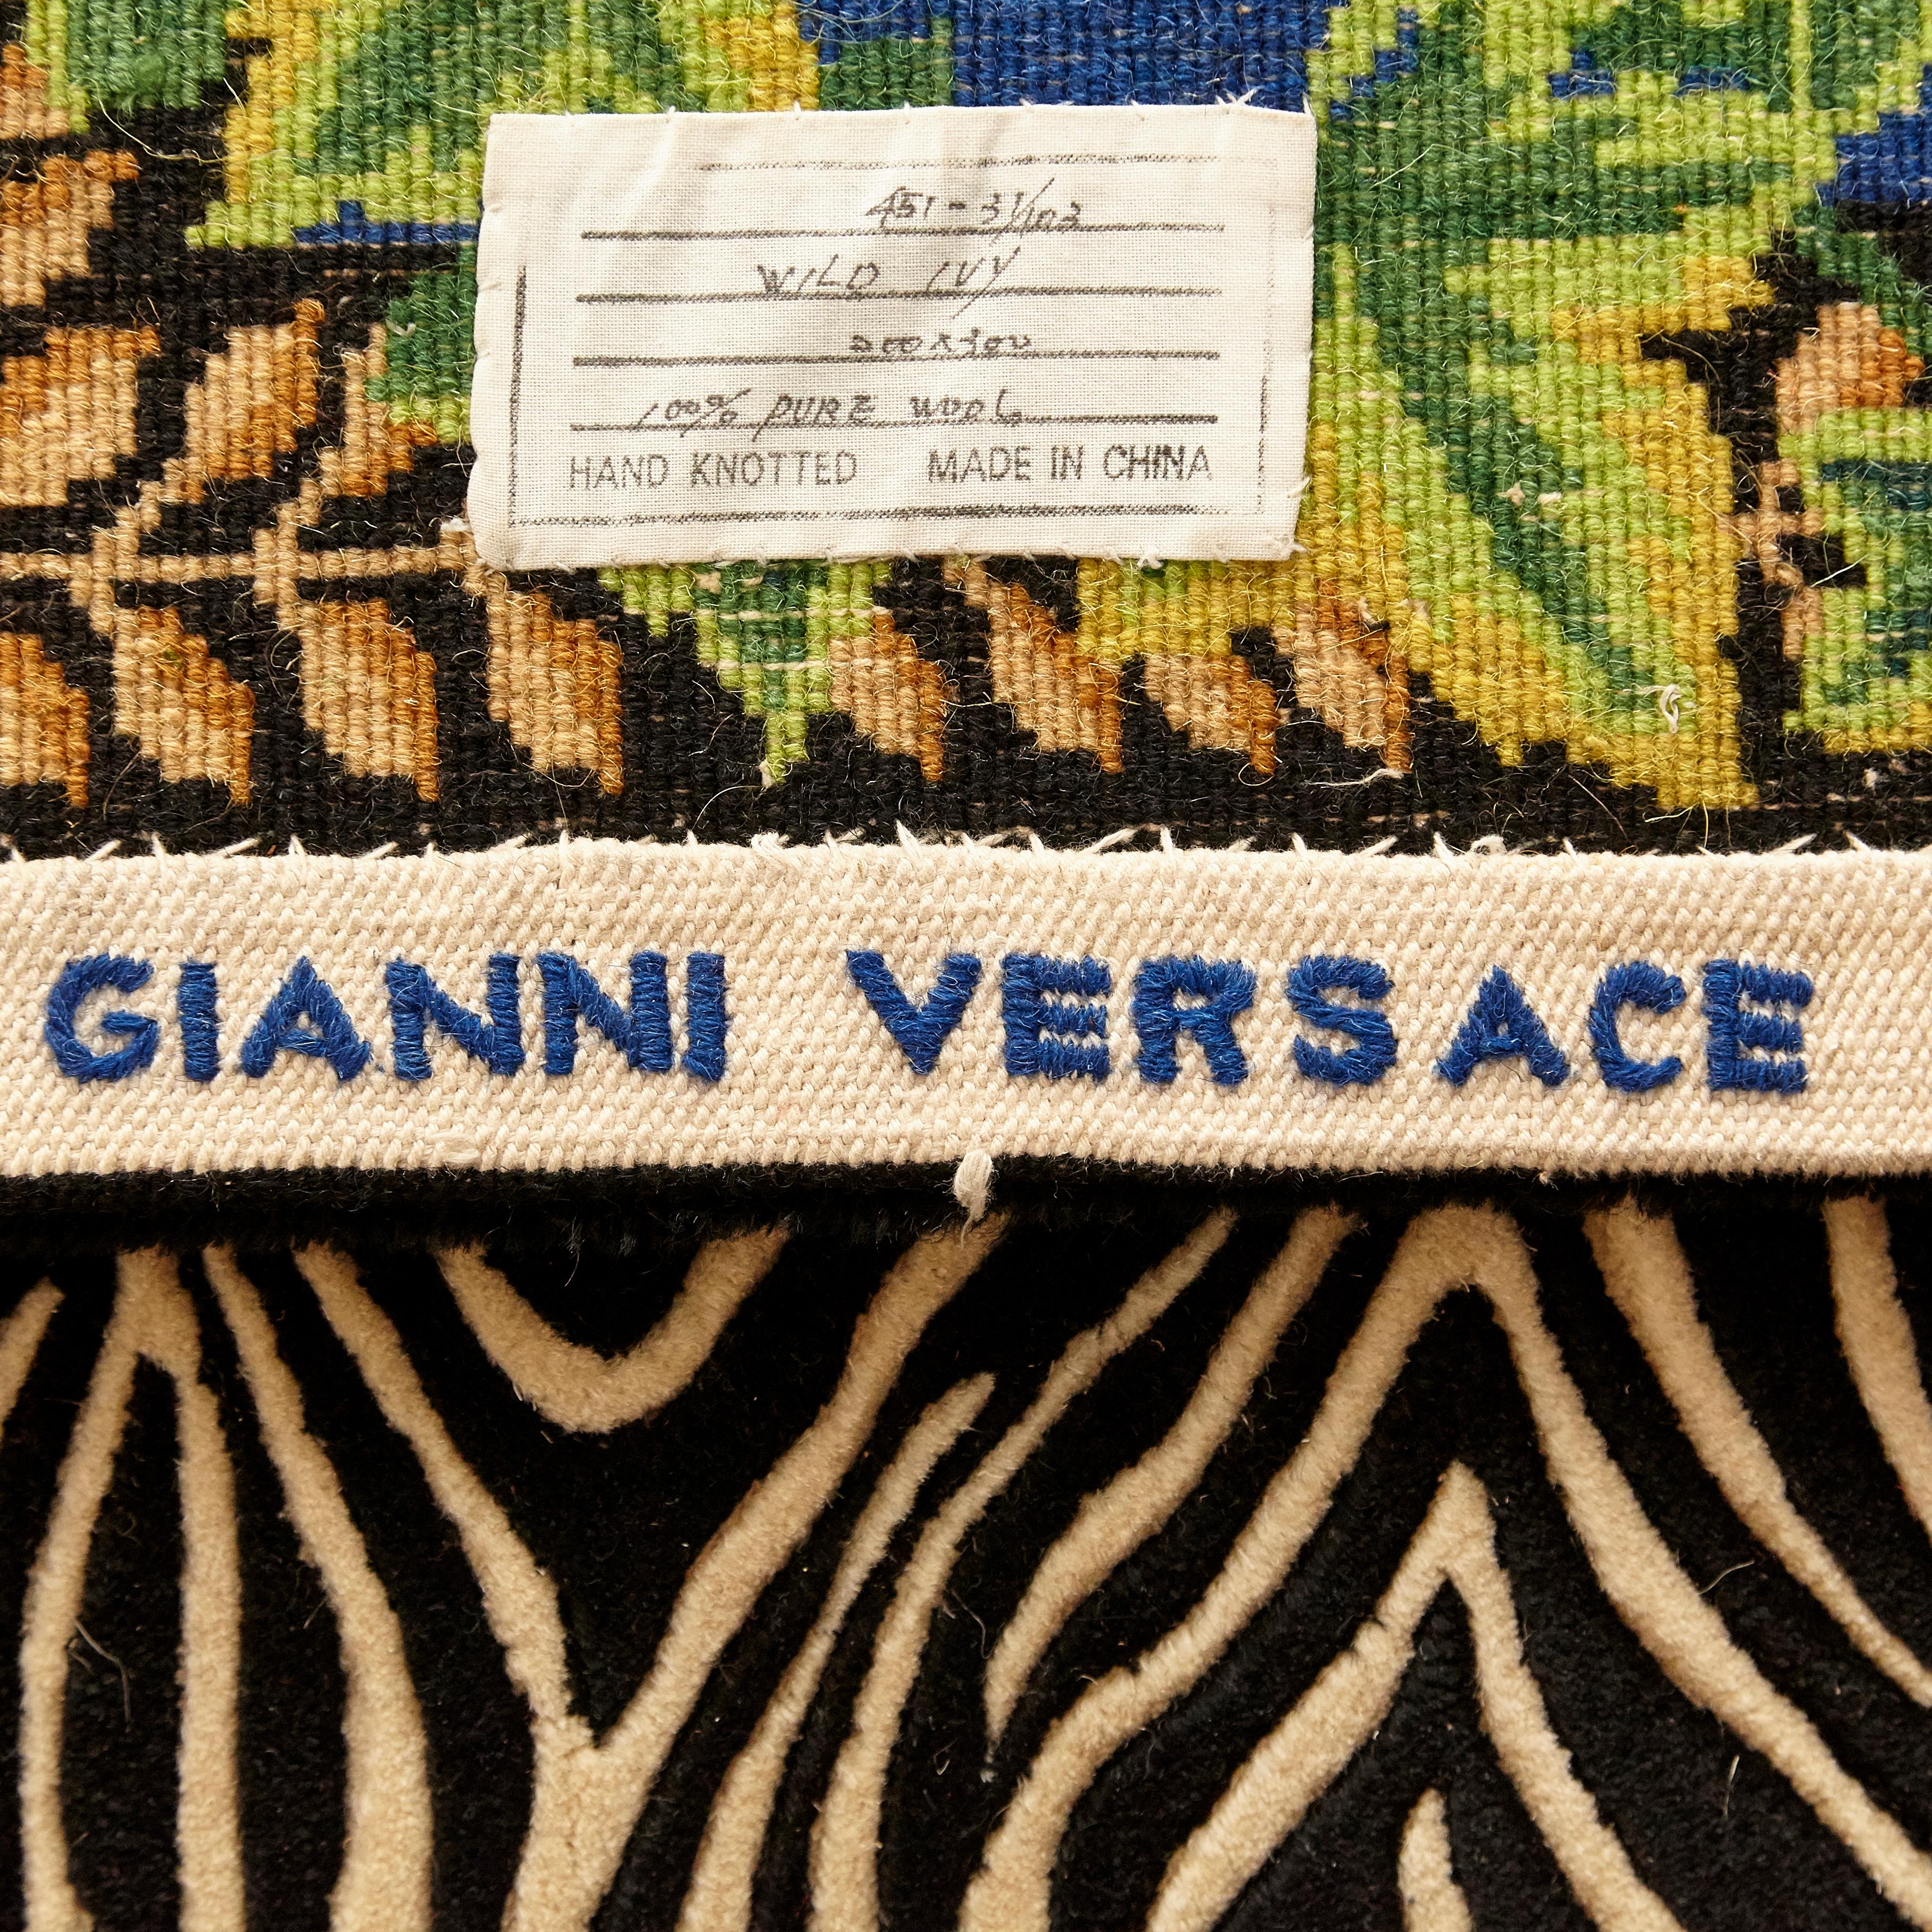 Gianni Versace Collection Rug Wild Ivy, Gold Zebra Animal Print, 1980 For Sale 6